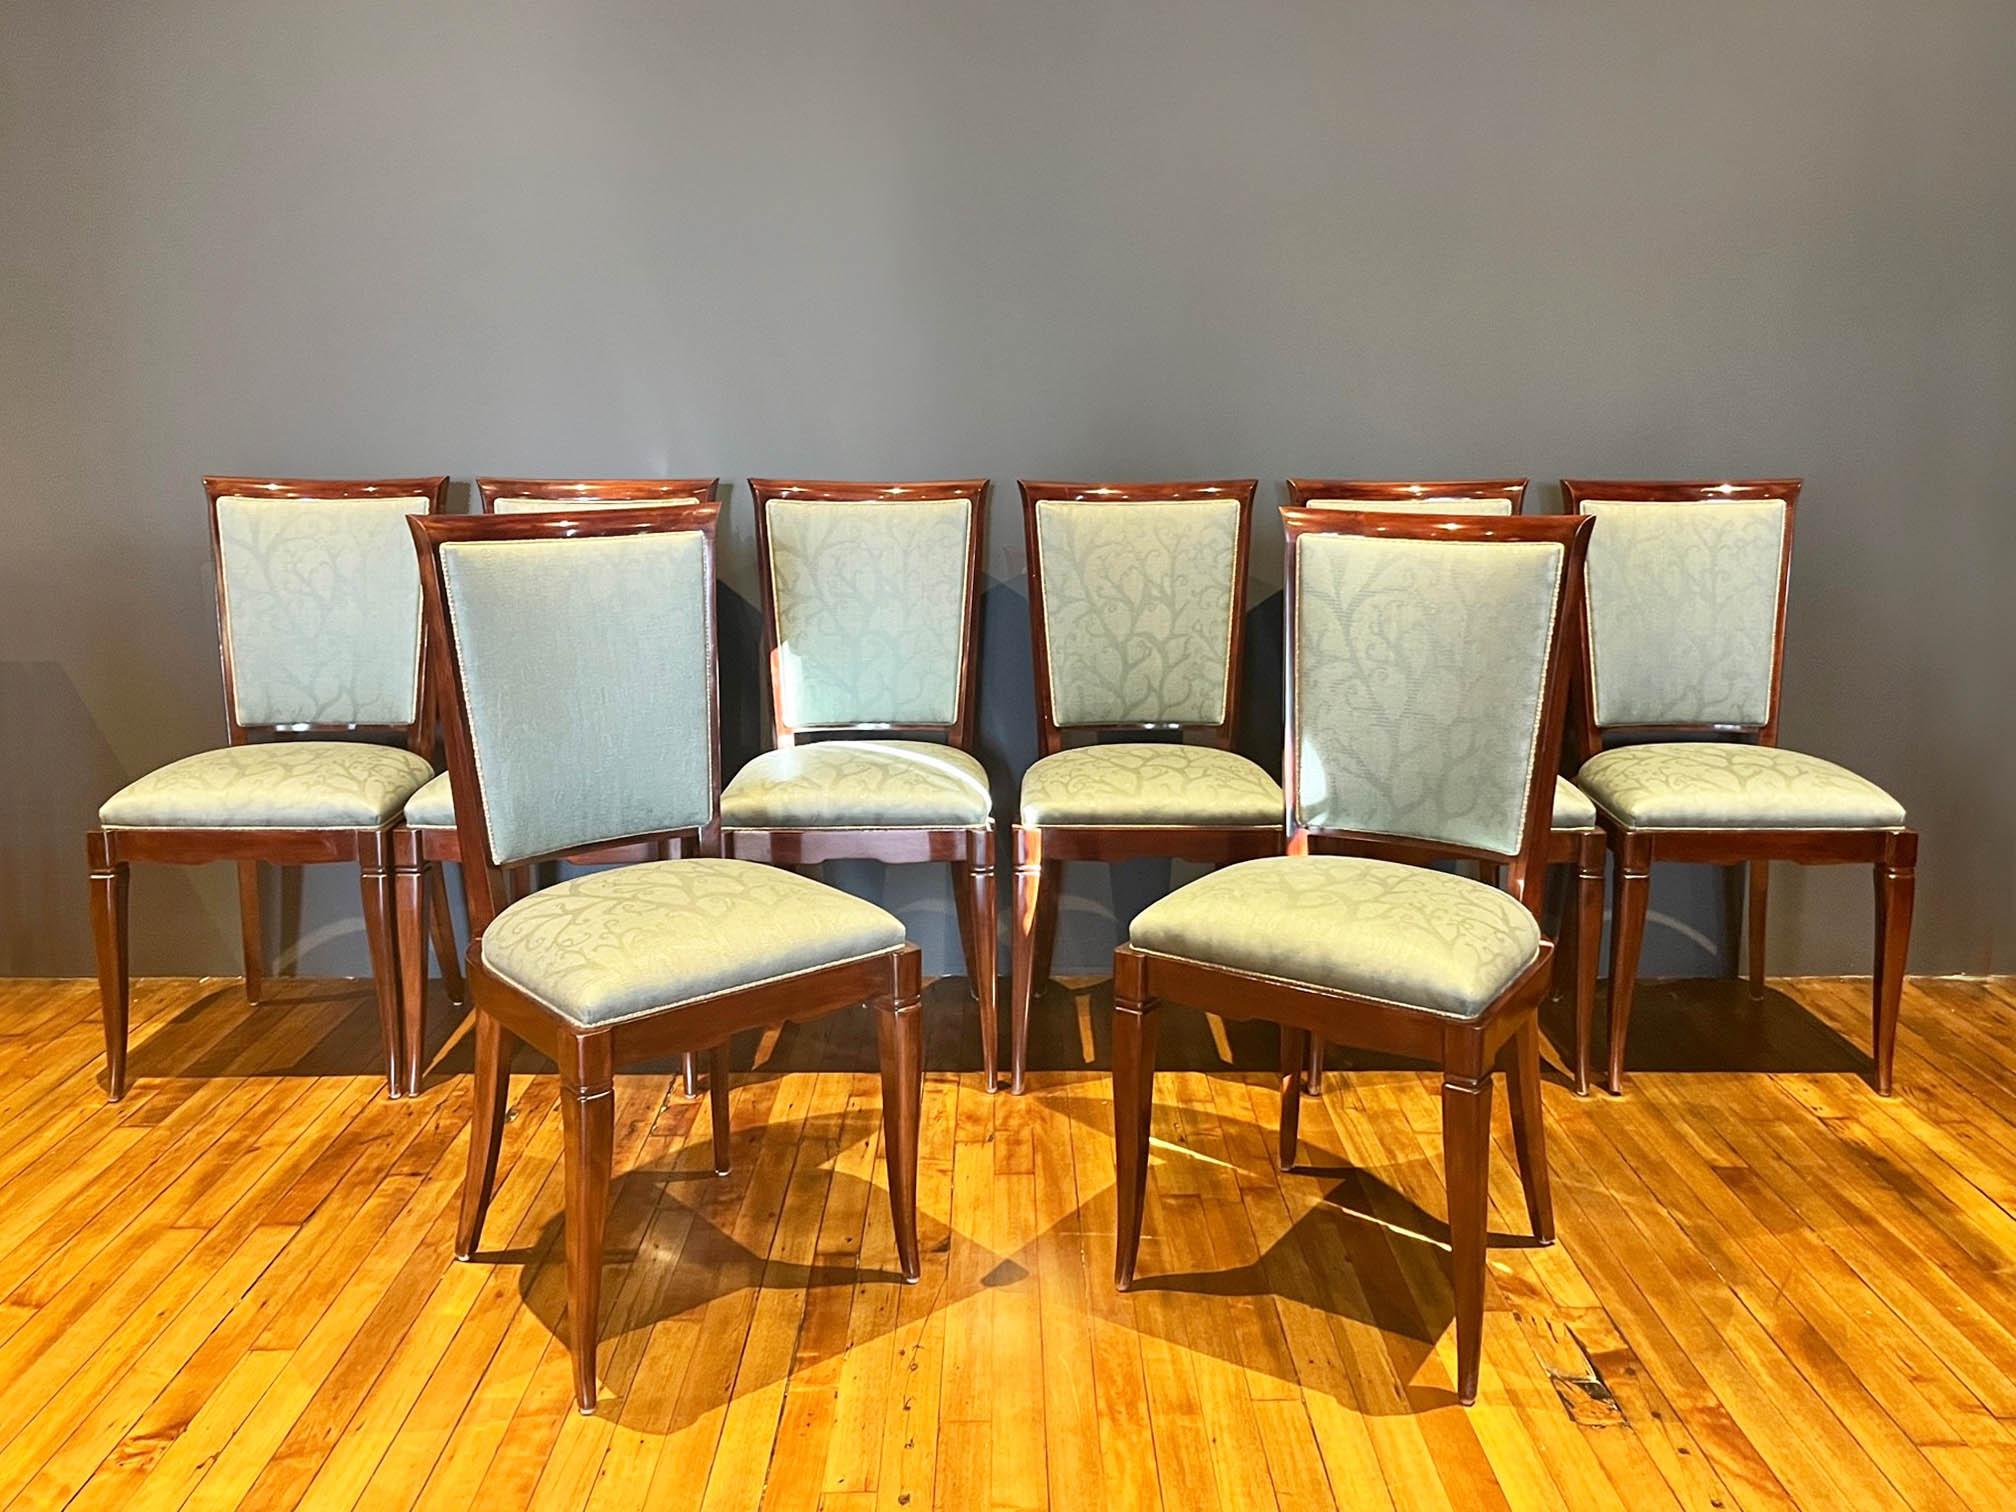 Elegant set of 8 Art Deco dining chairs in the style of Maurice Jallot, Jules Leleu and Jean Pascaud. The chairs boast solid wood frames with high backs and seats upholstered in green soft sheen jacquard fabric. 

2 matching dining room armchairs